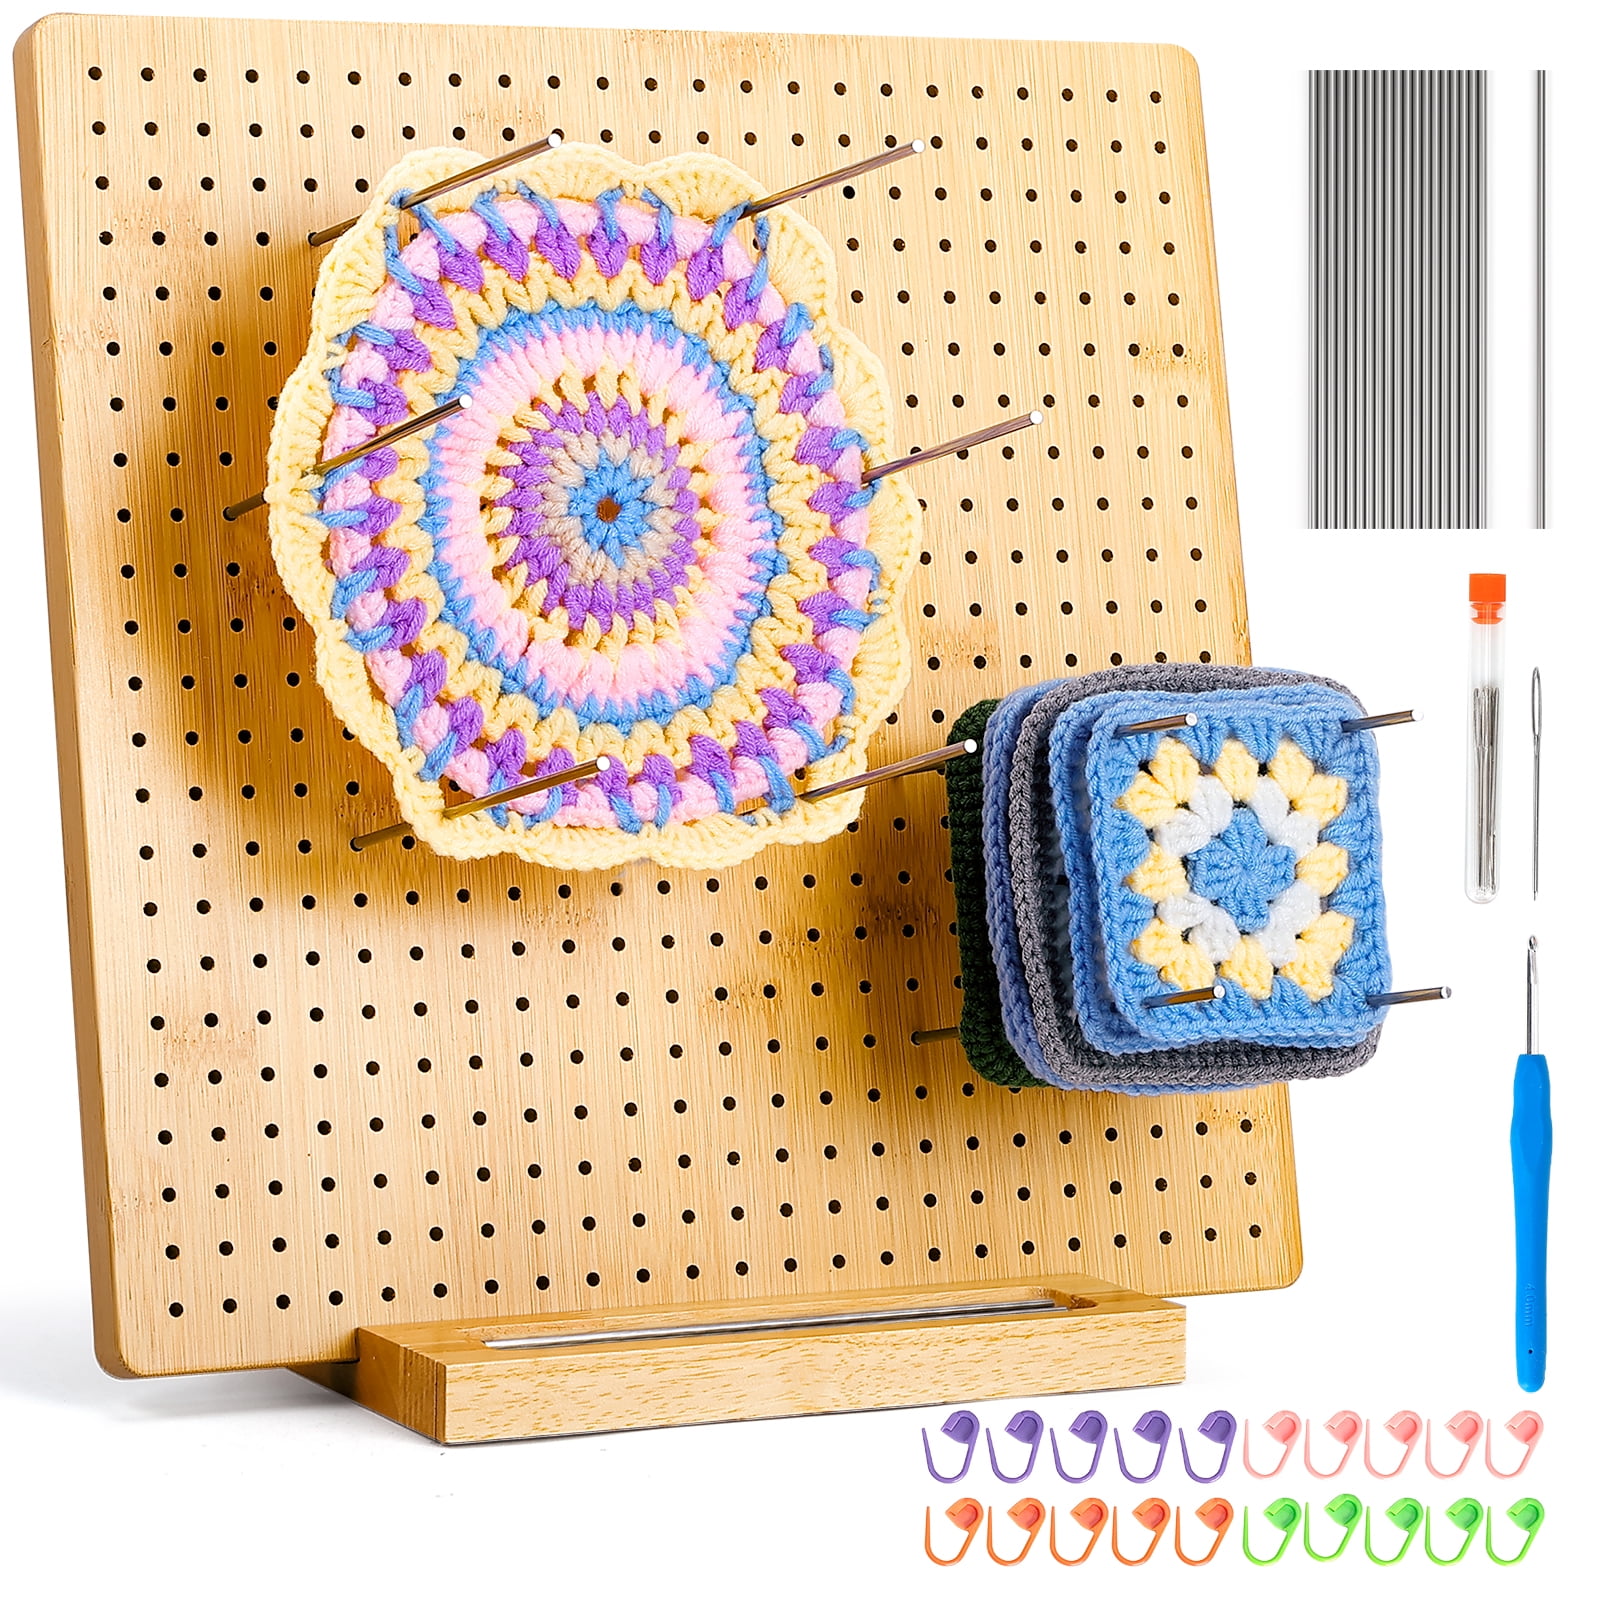 TAINAT 11.8 Inches Granny Crochet Square Blocking Board with 20 Pins,Wooden  Handcrafted Crochet Blocking Board with Pegs,Bamboo Blocking Mat for  Knitting Crochet and Granny Square